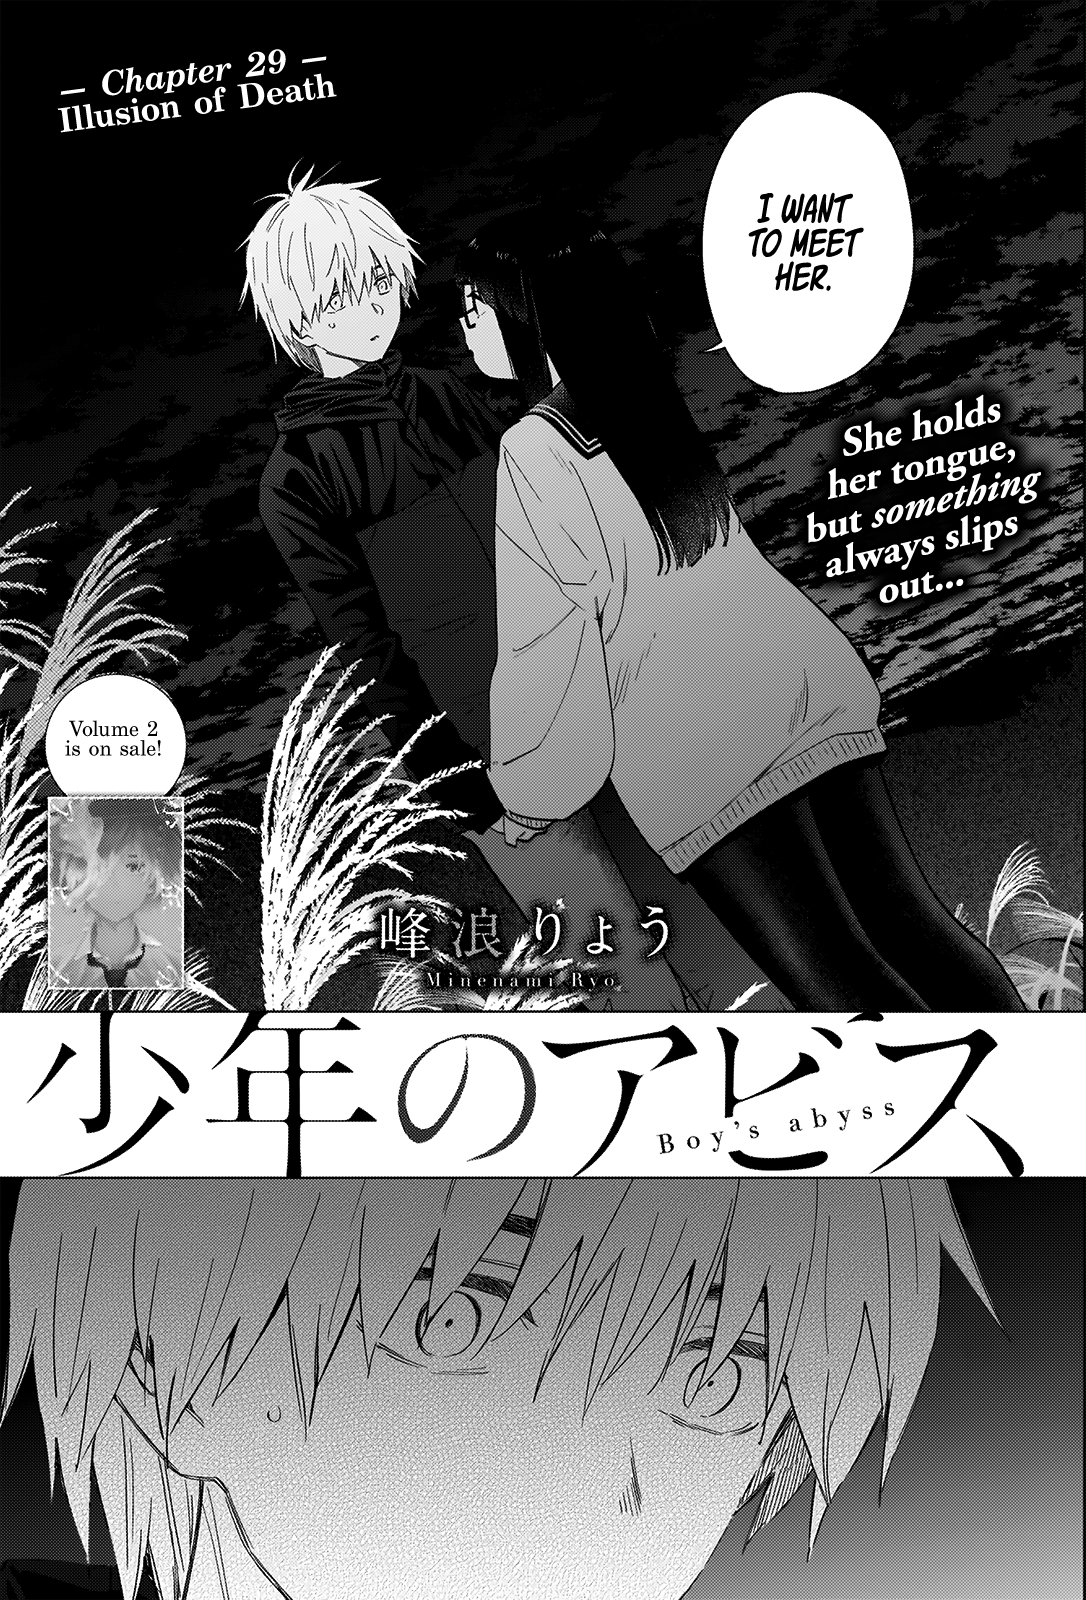 Boy's Abyss Chapter 29: Illusion Of Death - Picture 2